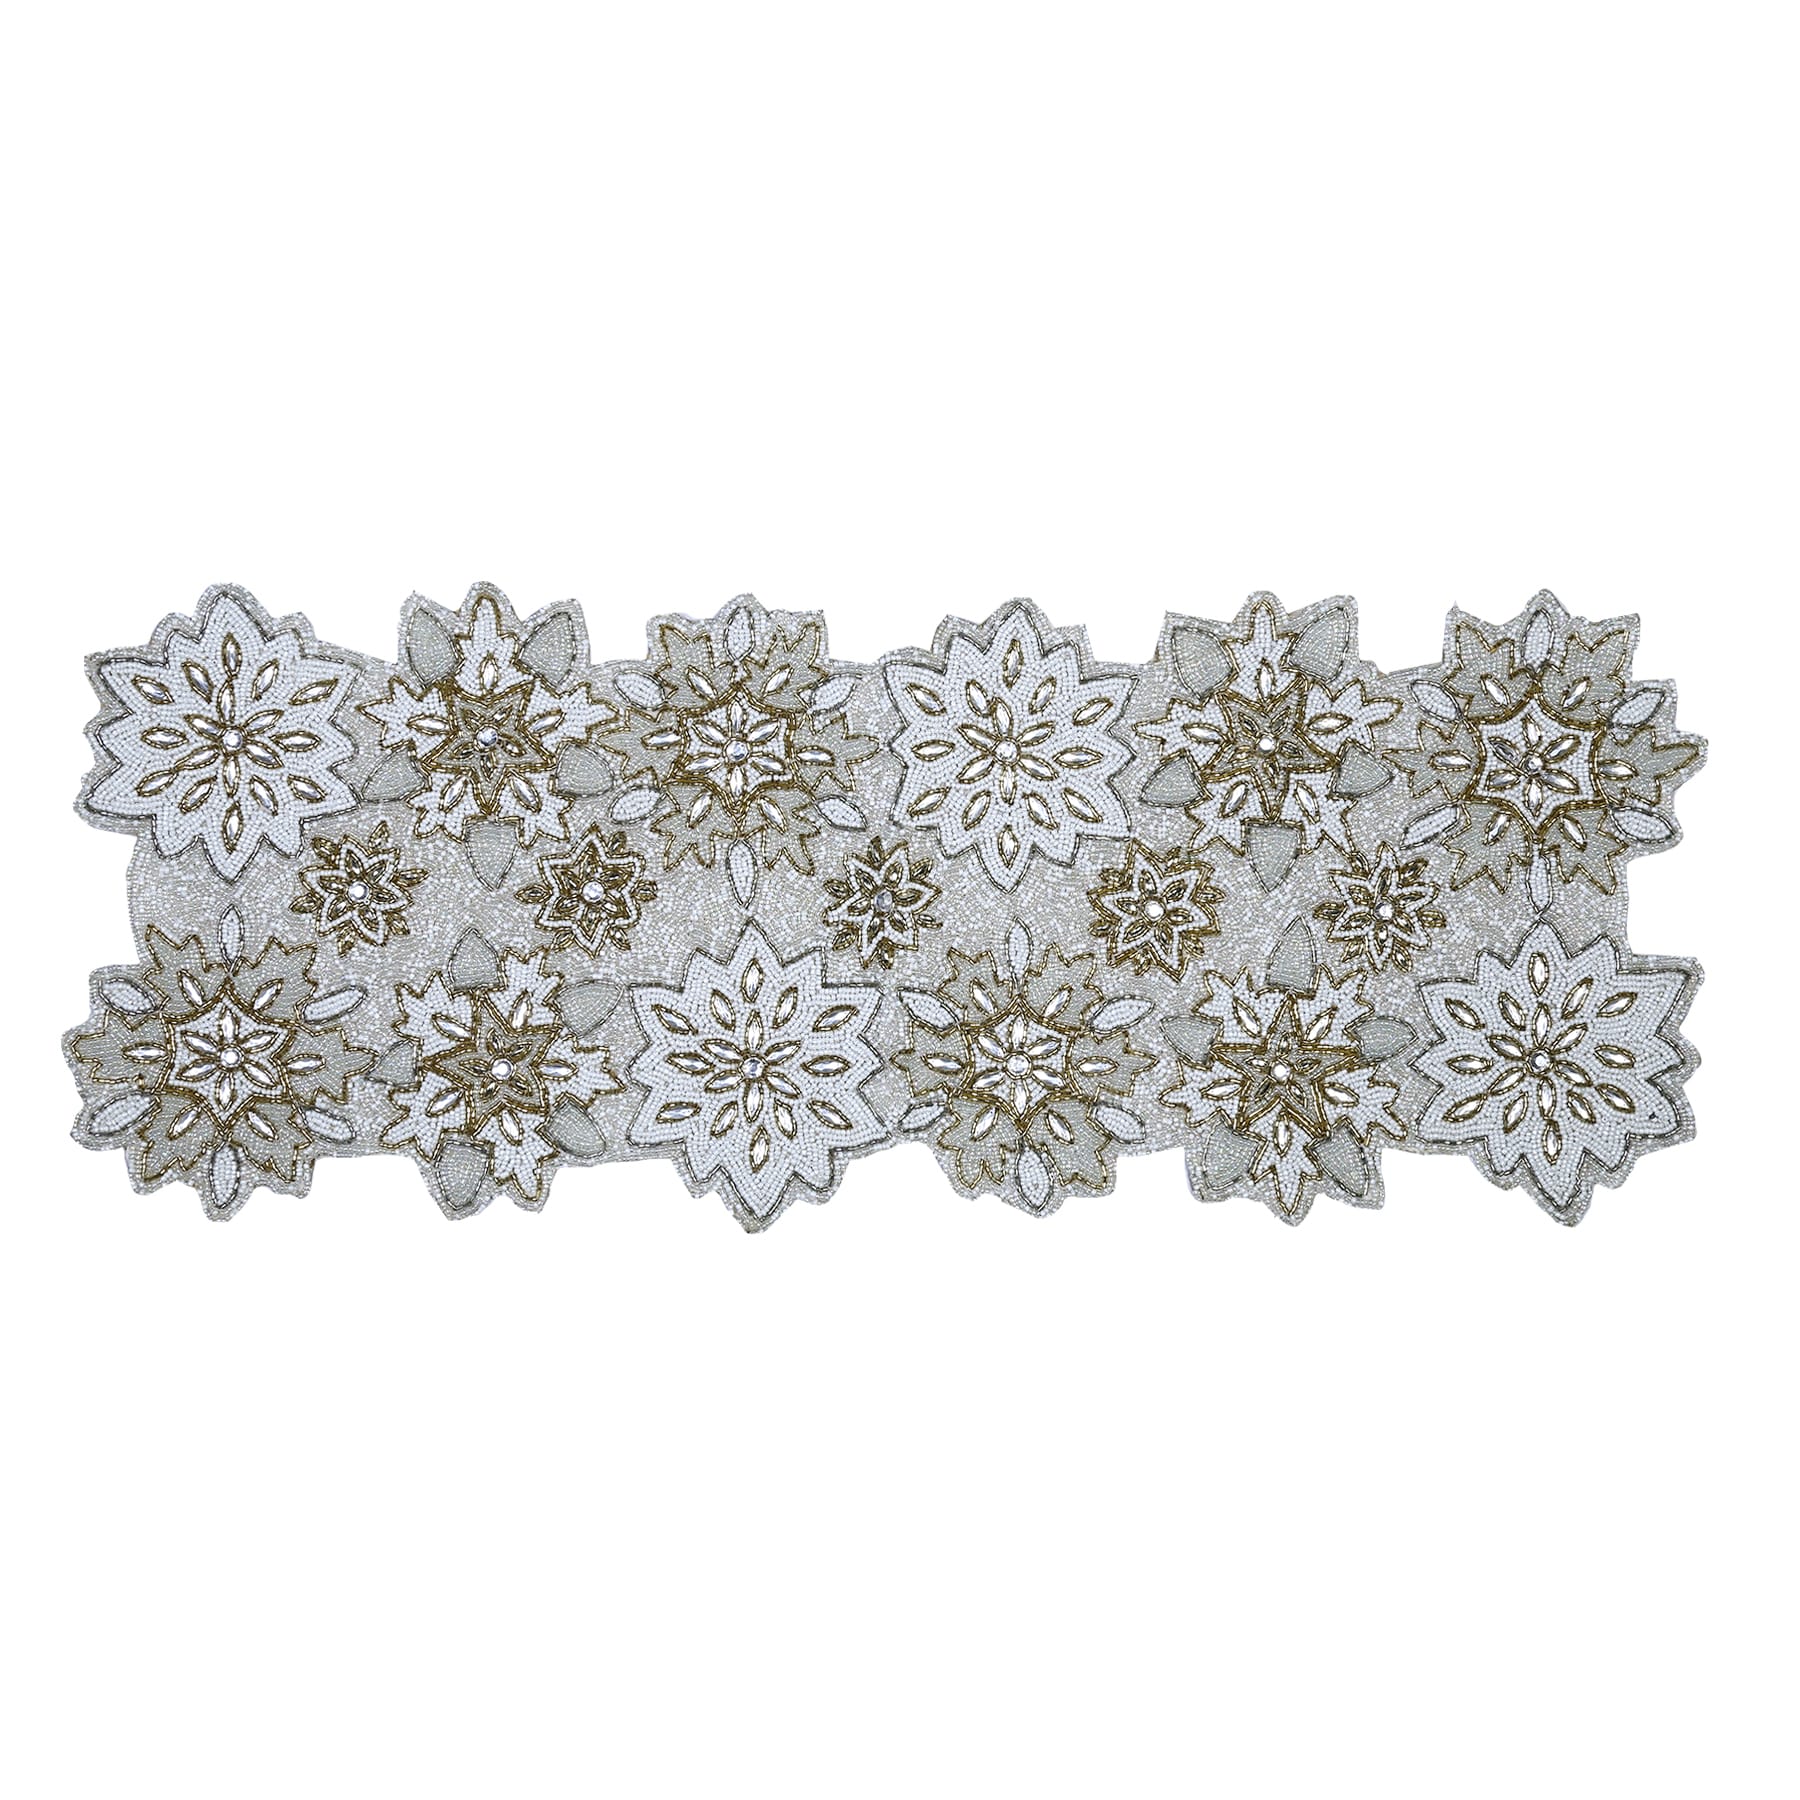 Beaded Table Runner Pack of 1 Measure 13 * 36 Inches (White Pearl) 13 x 36  Inche